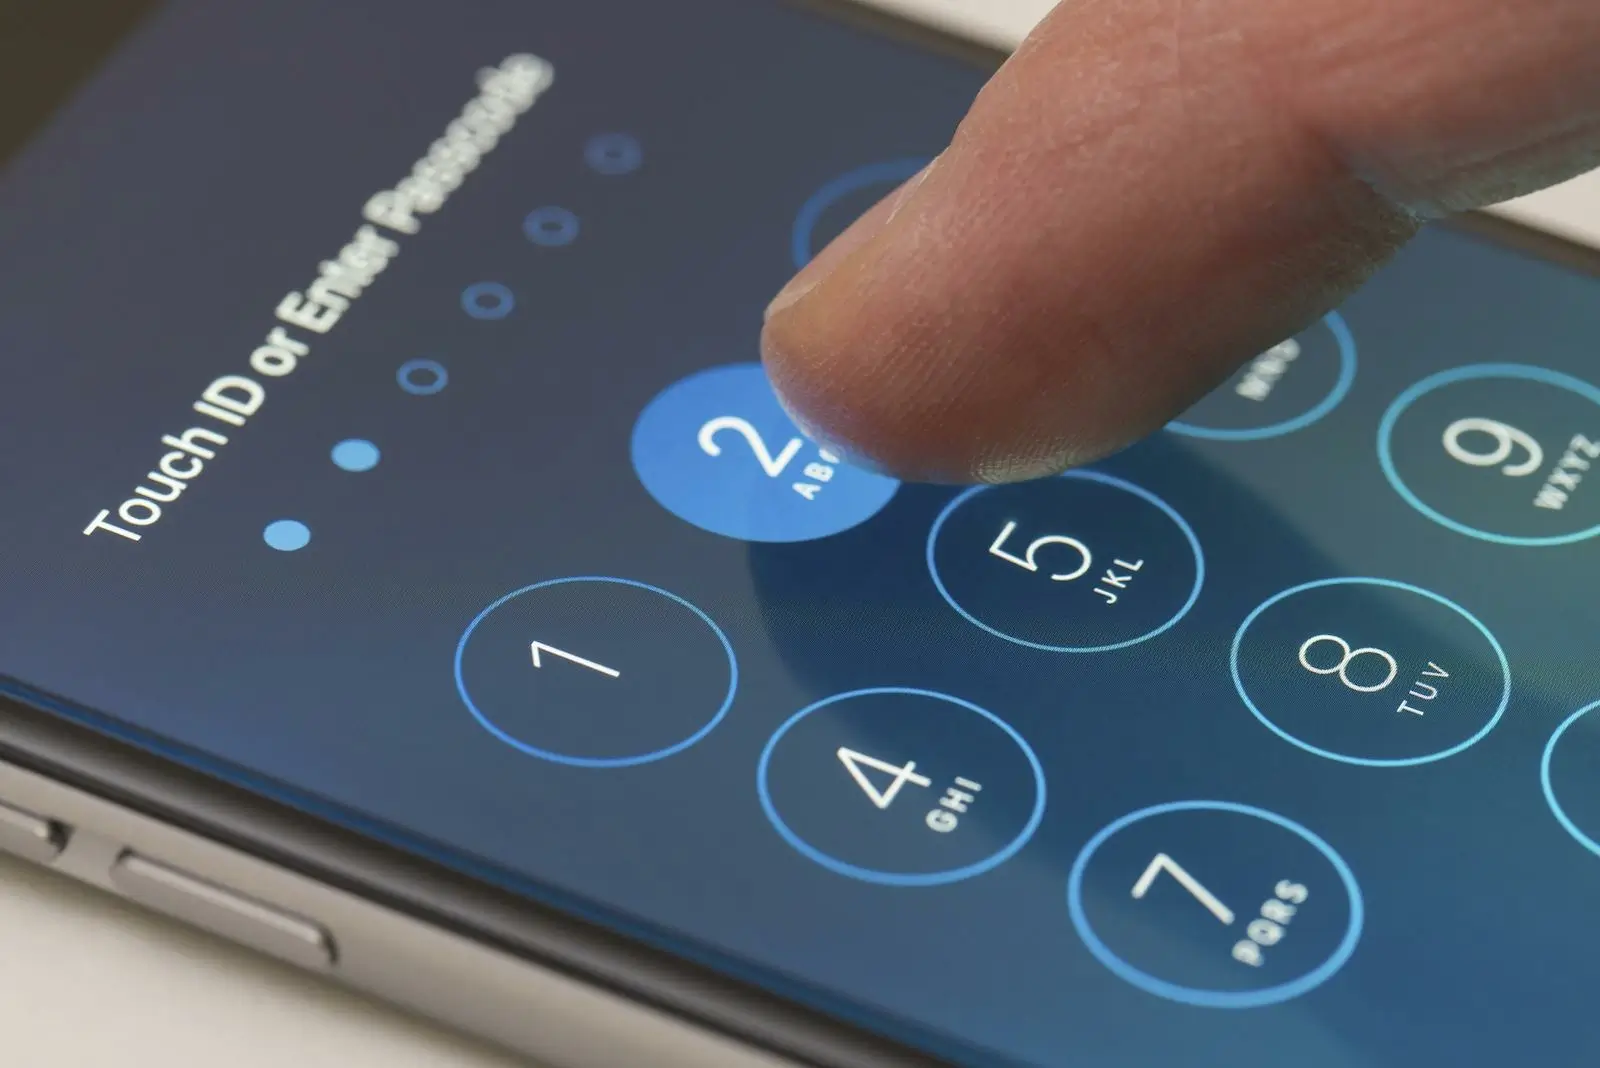 How to unlock your phone if you have forgotten the password - article